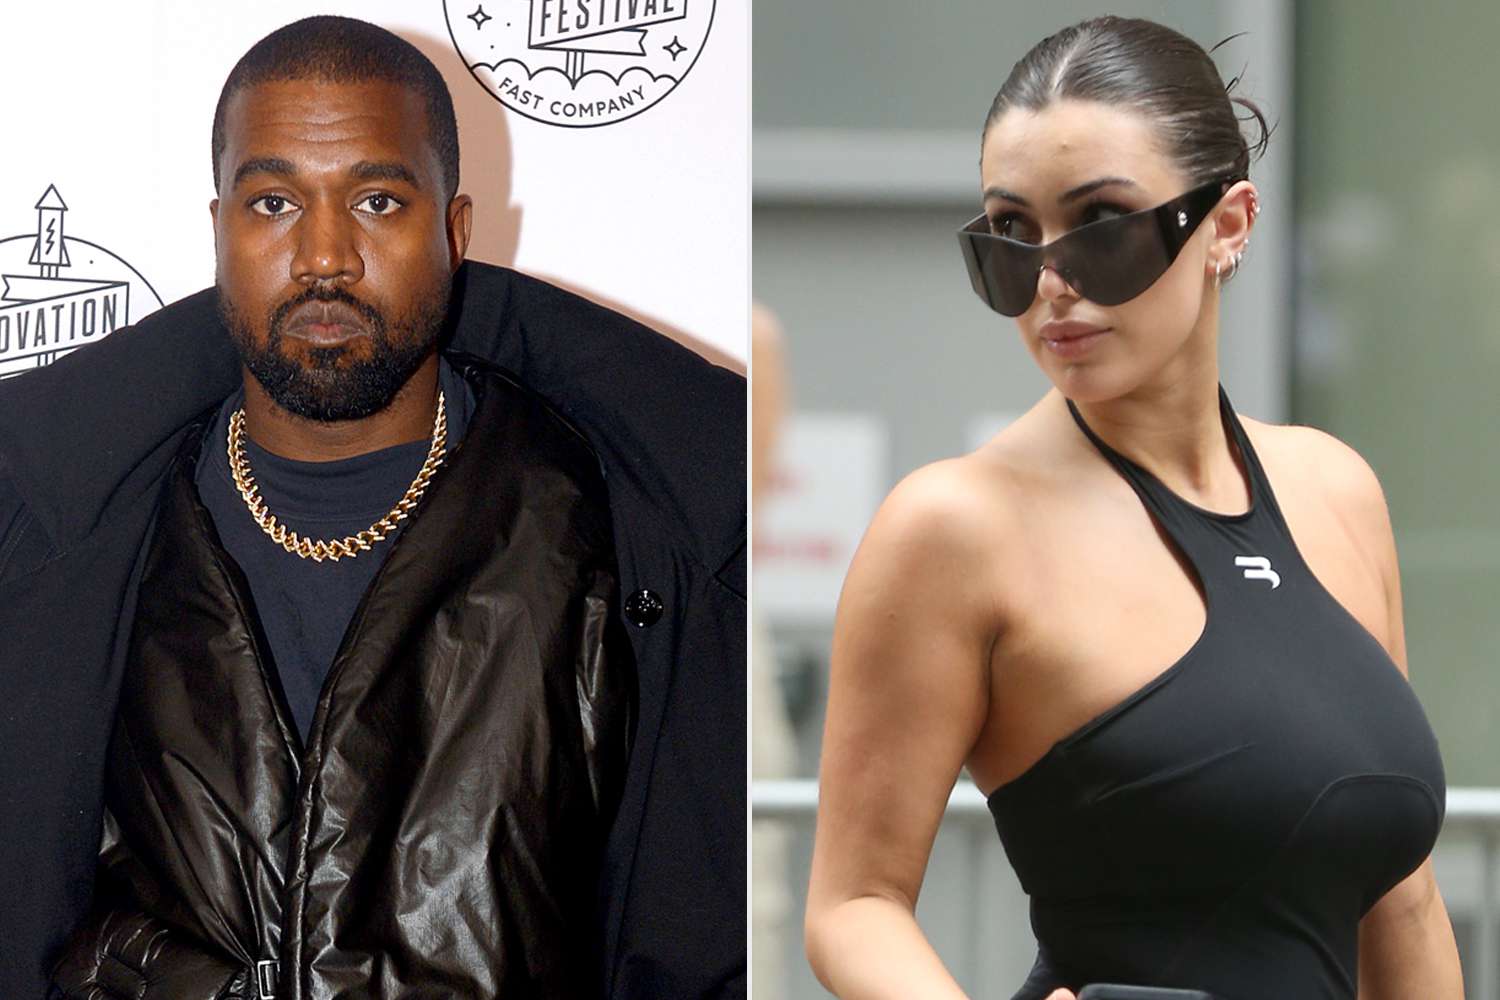 Bianca Censori Friends Are Concerned That Kanye West Is Turning Her Into 'Radicalized' Kim